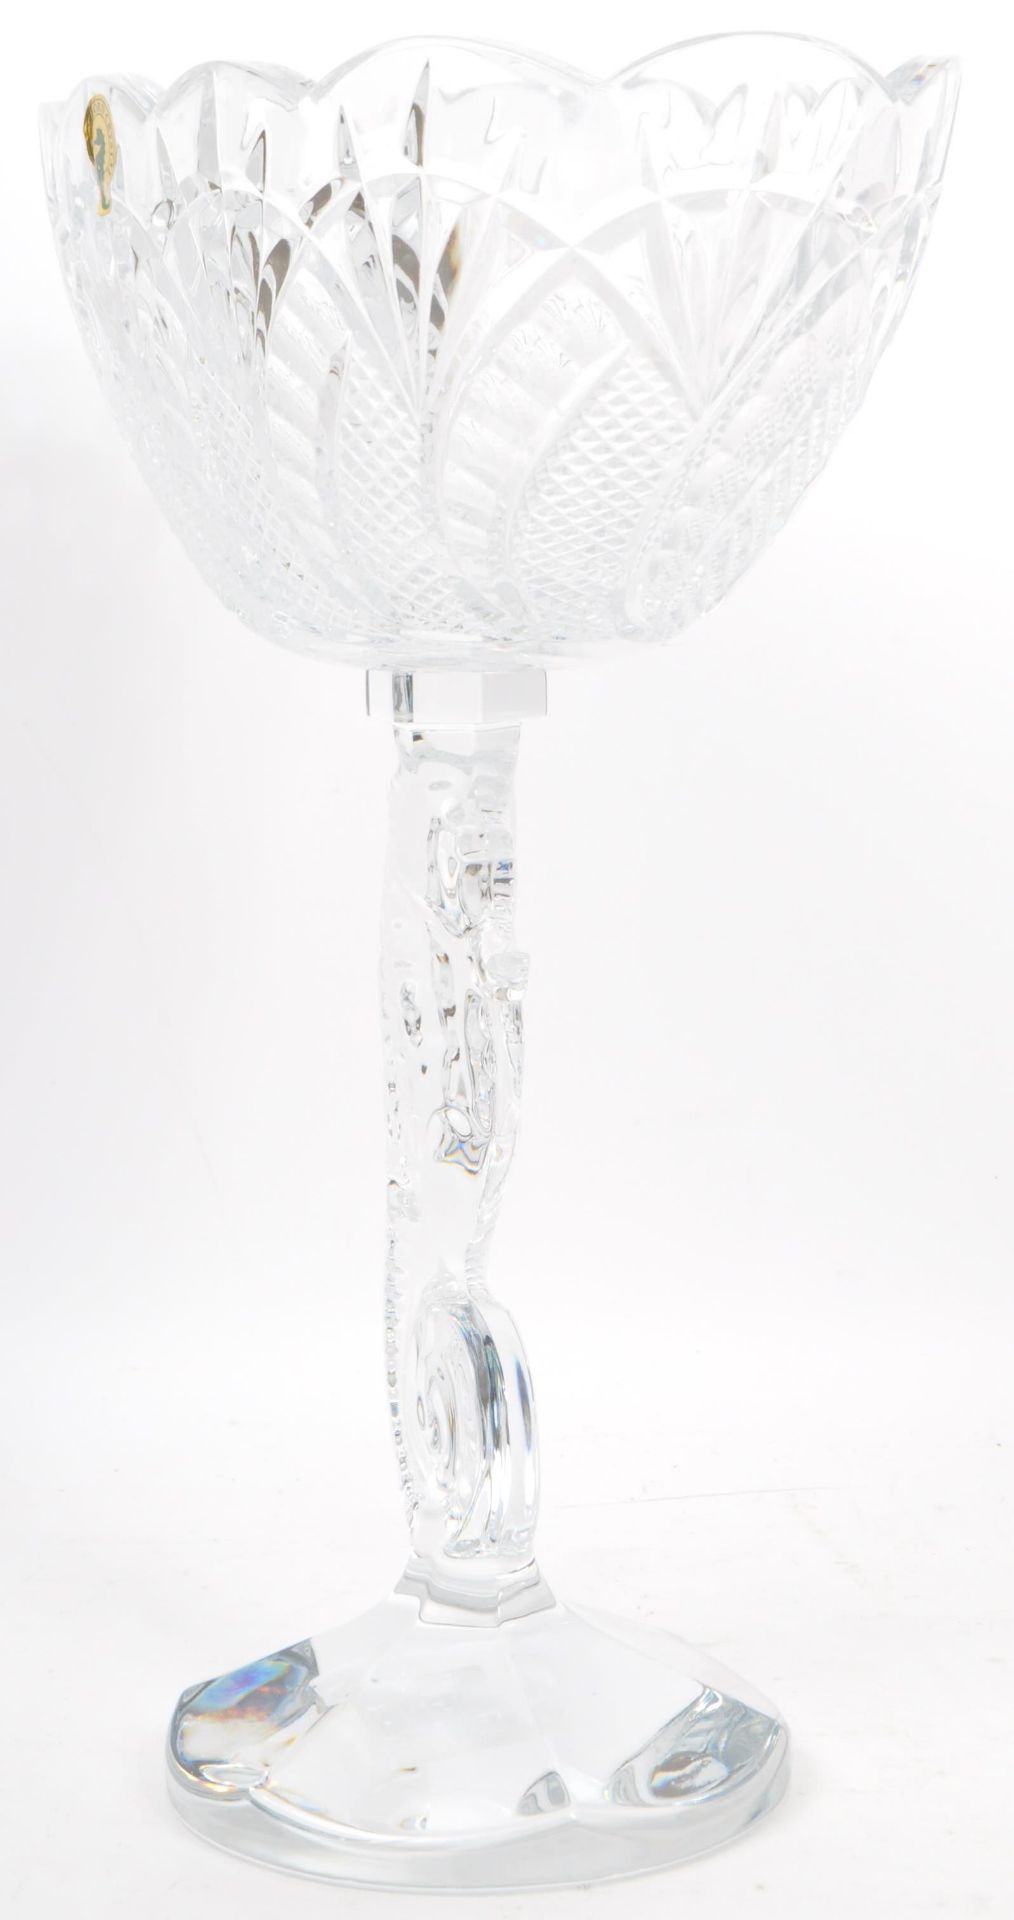 WATERFORD CRYSTAL GLASS - SEAHORSE TAZZA CENTREPIECE NOS - Image 5 of 7